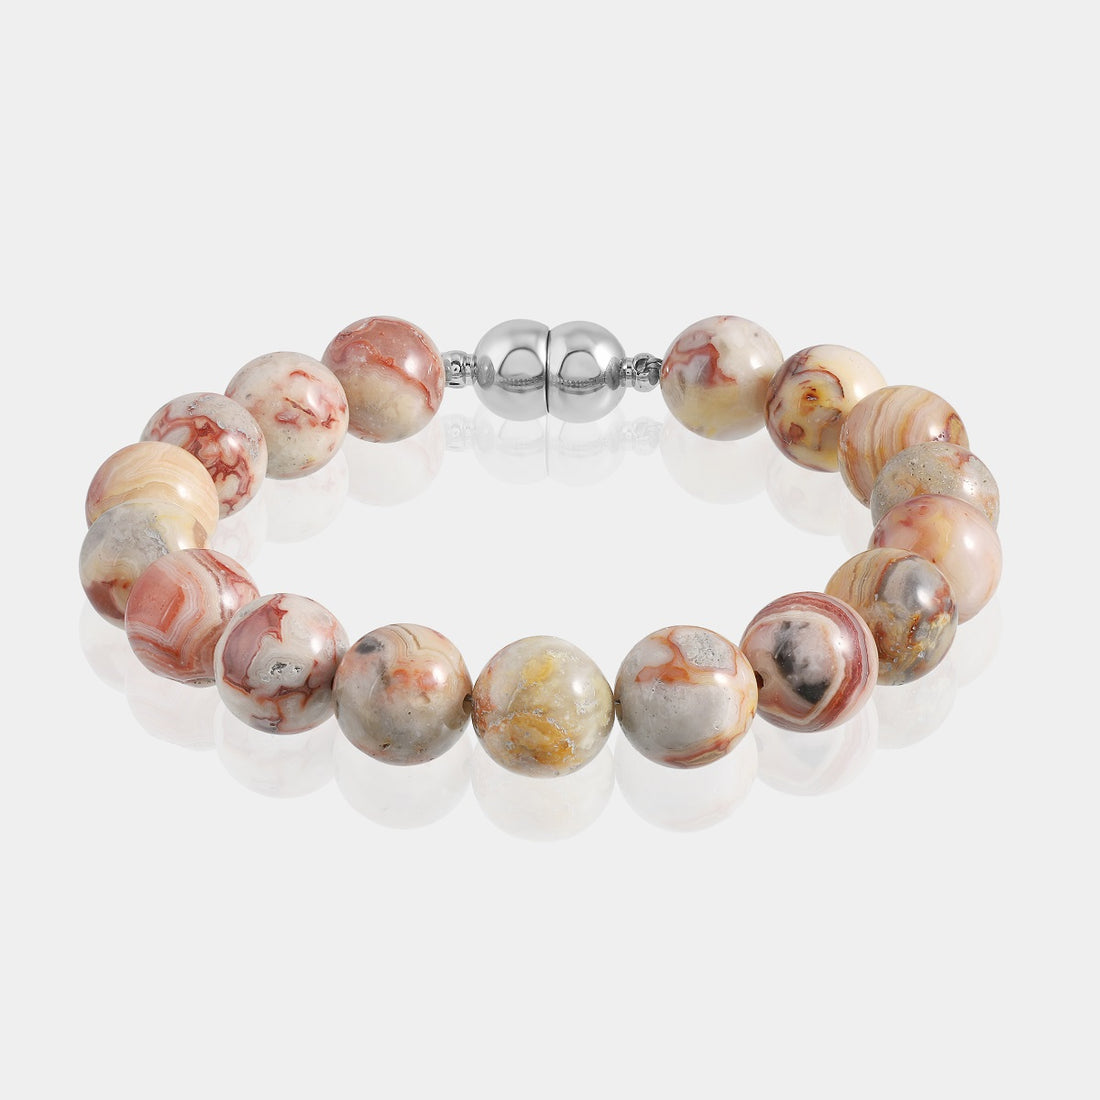 A close-up of a handmade bracelet adorned with smooth round crazy lace agate gemstone beads, showcasing vibrant and intricate multicolor patterns.